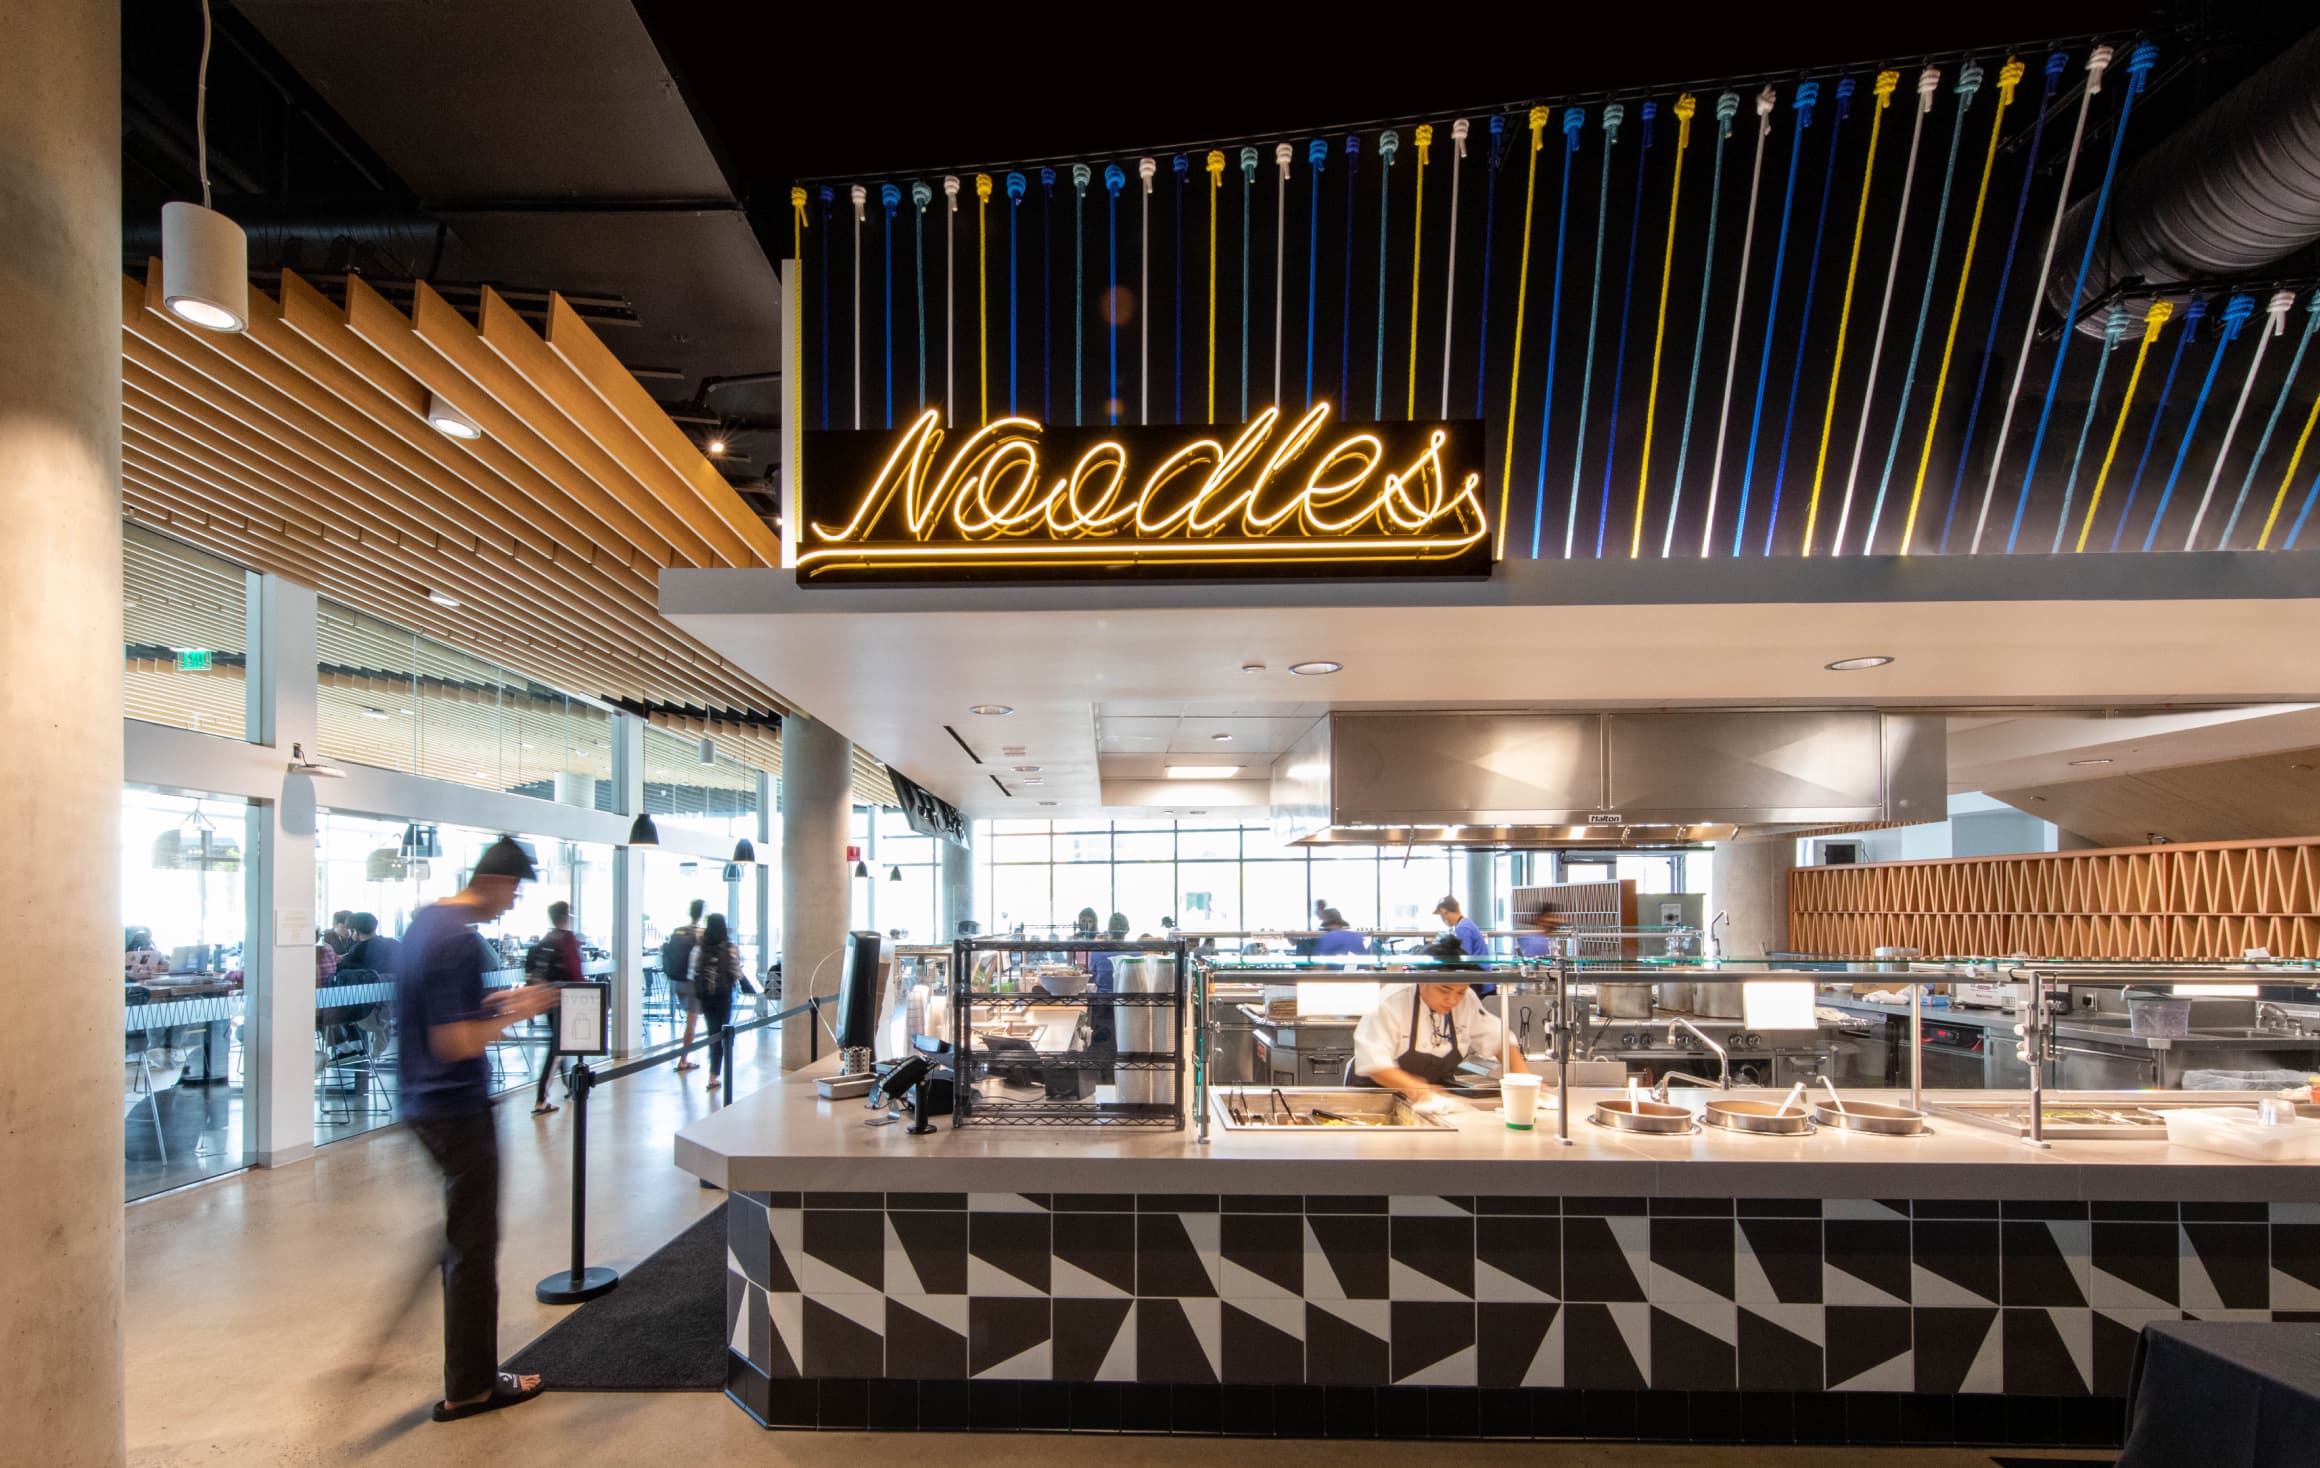 Neon tube lettering sign spelling "Noodles" in a warm light mounted to canopy above vendor in UC San Diego Sixth College's dining hall by RSM Design in San Diego, California. 